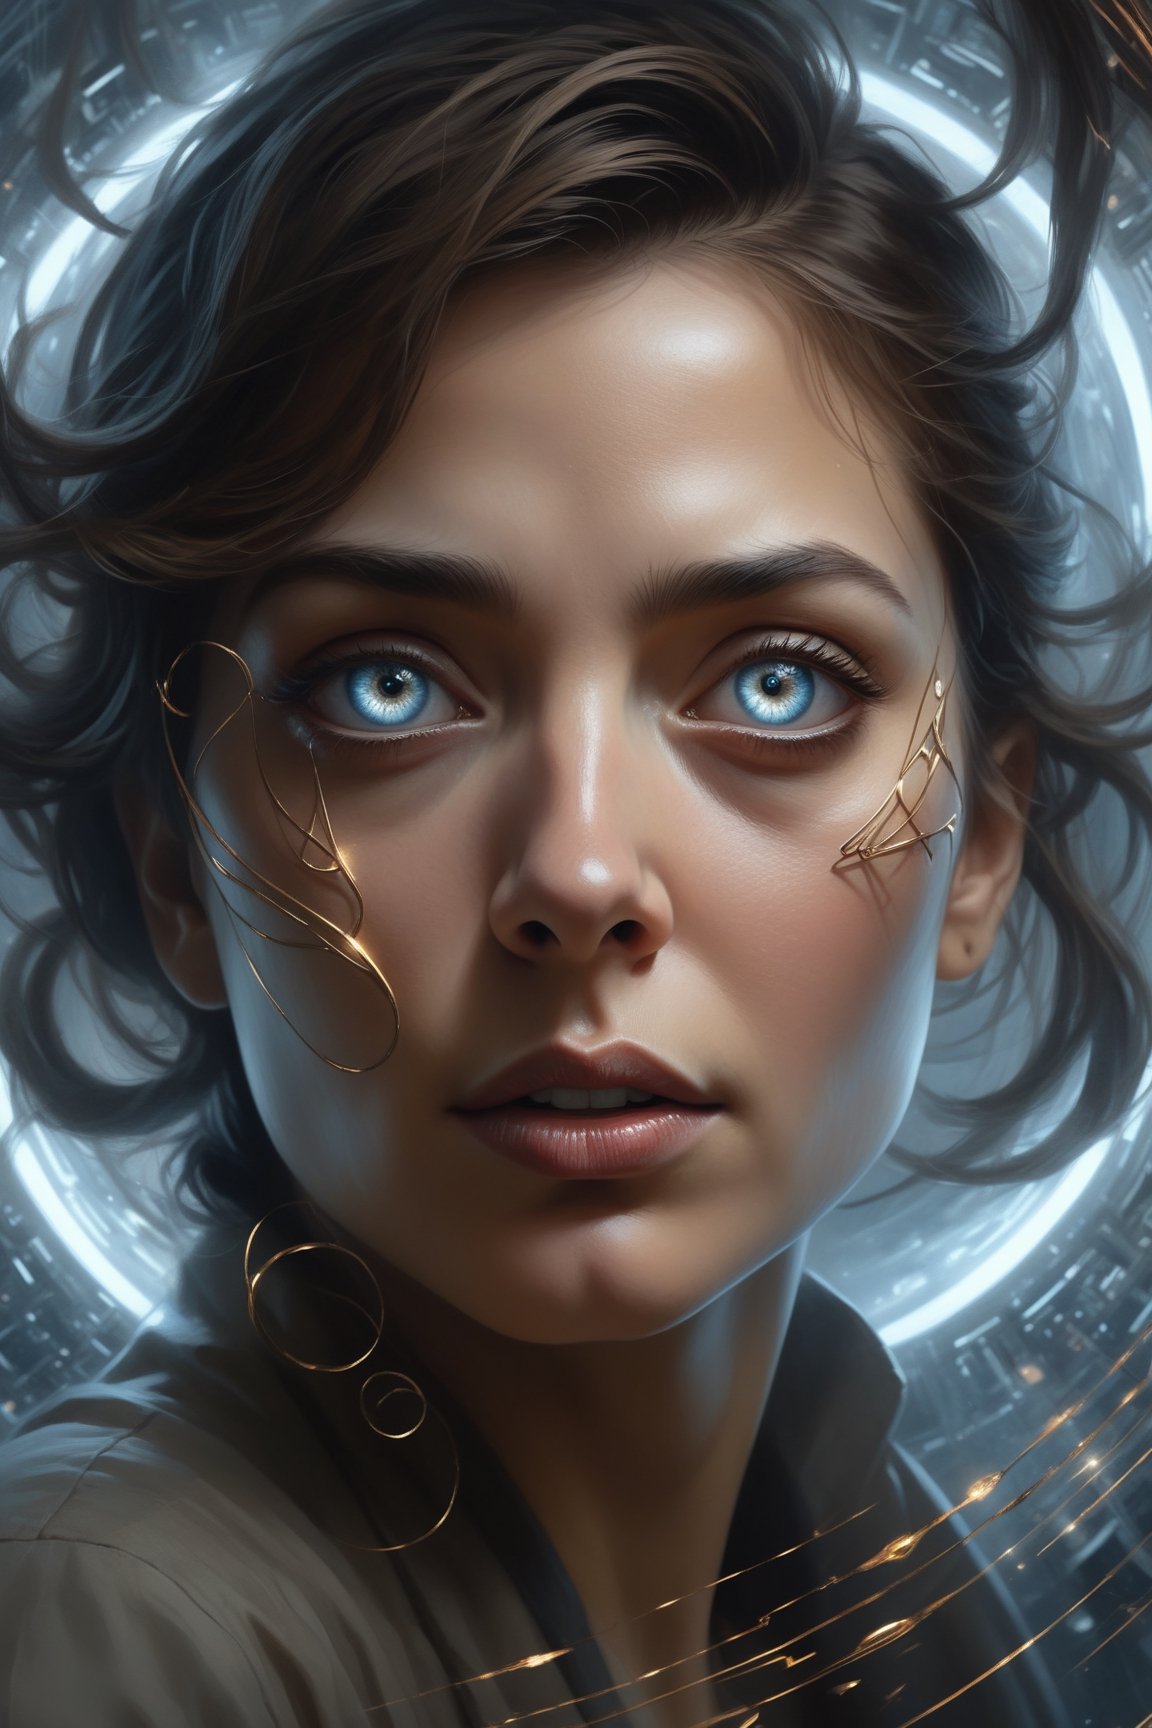 In the style of both Alejandro Burdisio and Aleksi Briclot, a close-up poster featuring a (woman with expressive eyes:1.2) caught in a digital light symphony of (random shapes creating a mesmerizing void:0.8), where the interplay between their artistic visions accentuates her allure and enigma.





